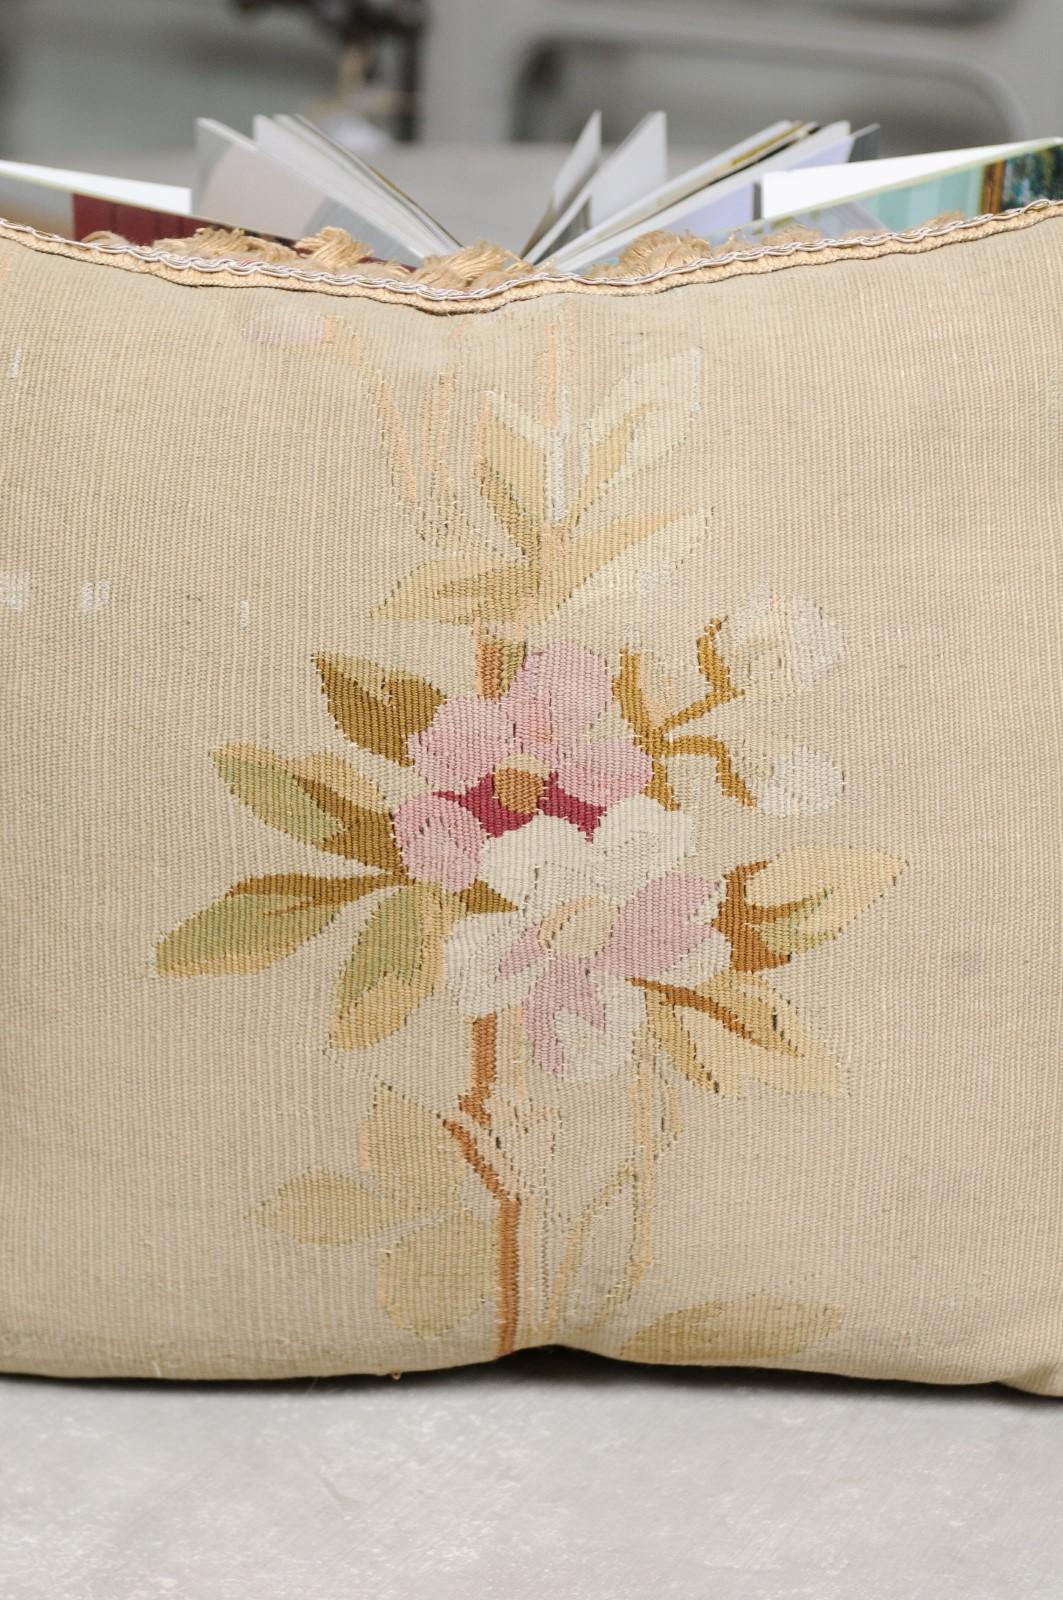 French 19th Century Aubusson Tapestry Pillow with Floral Decor and Tassels 1